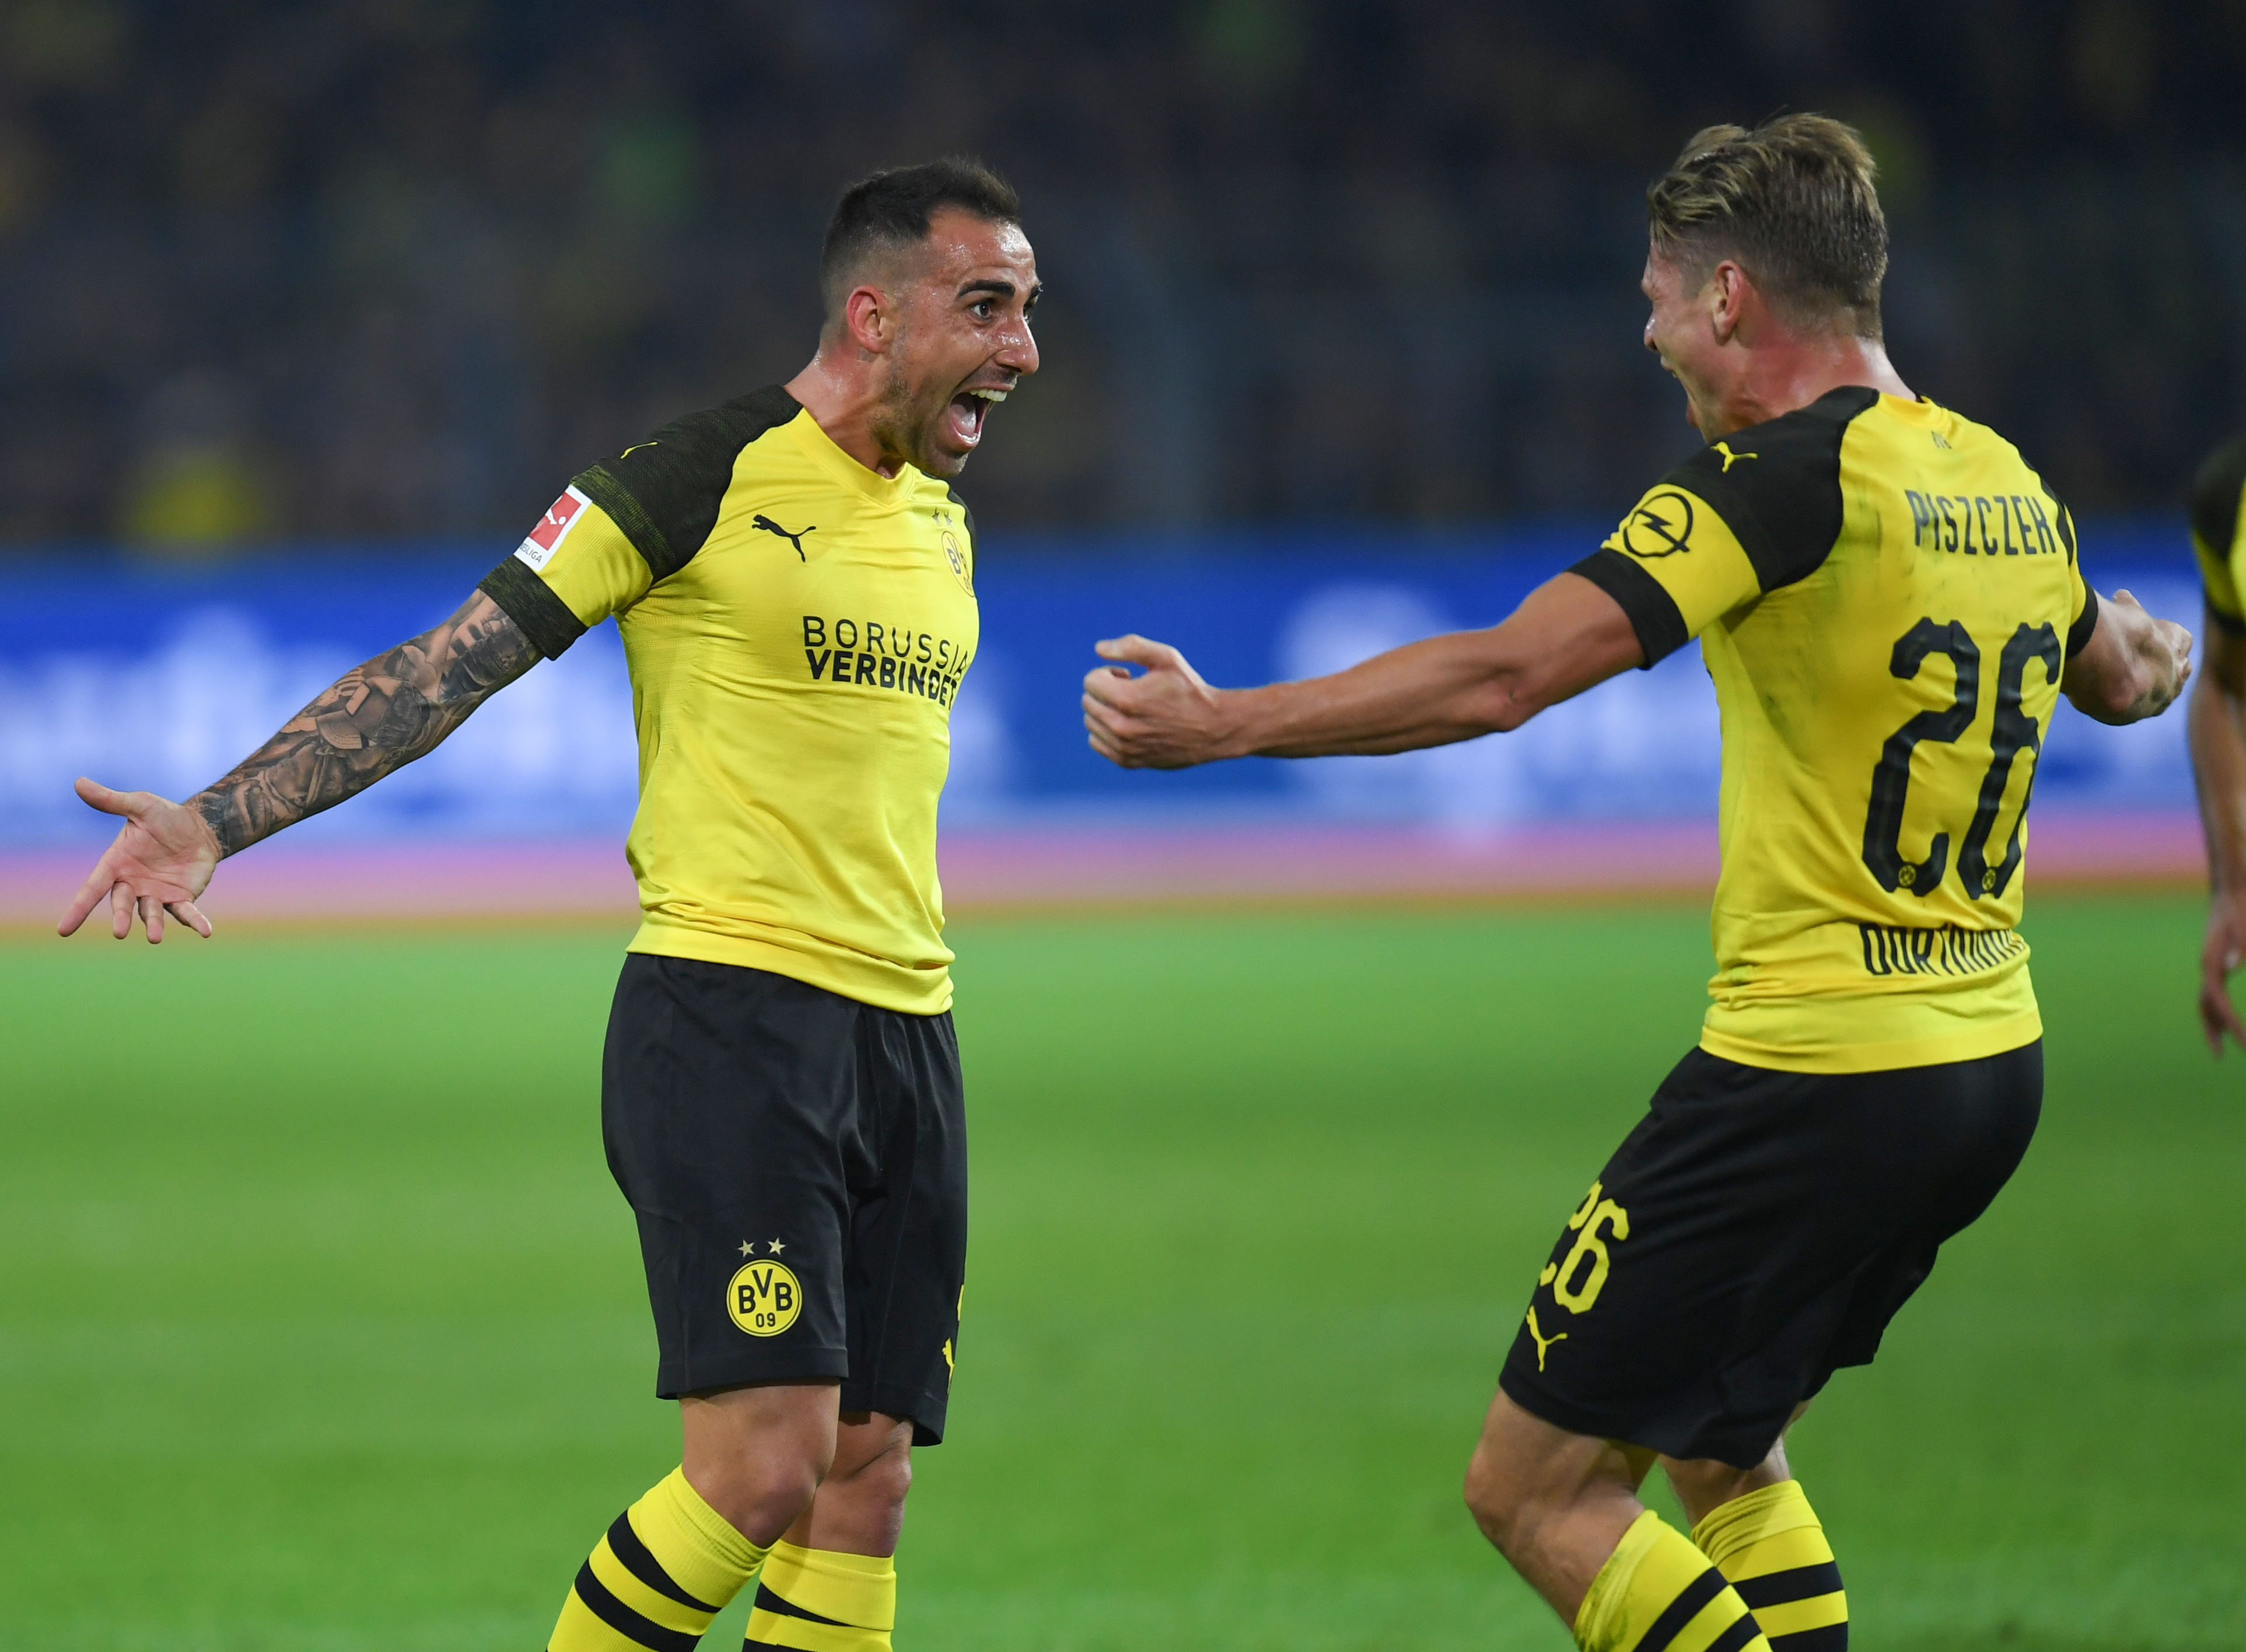 Dortmund's midfielder Paco Alacer celebrates with his teammates after scoring during the German first division Bundesliga football match Borussia Dortmund v Eintracht Frankfurt in Dortmund, western Germany, on September 14, 2018. (Photo by Patrik STOLLARZ / AFP) / RESTRICTIONS: DFL REGULATIONS PROHIBIT ANY USE OF PHOTOGRAPHS AS IMAGE SEQUENCES AND/OR QUASI-VIDEO        (Photo credit should read PATRIK STOLLARZ/AFP/Getty Images)